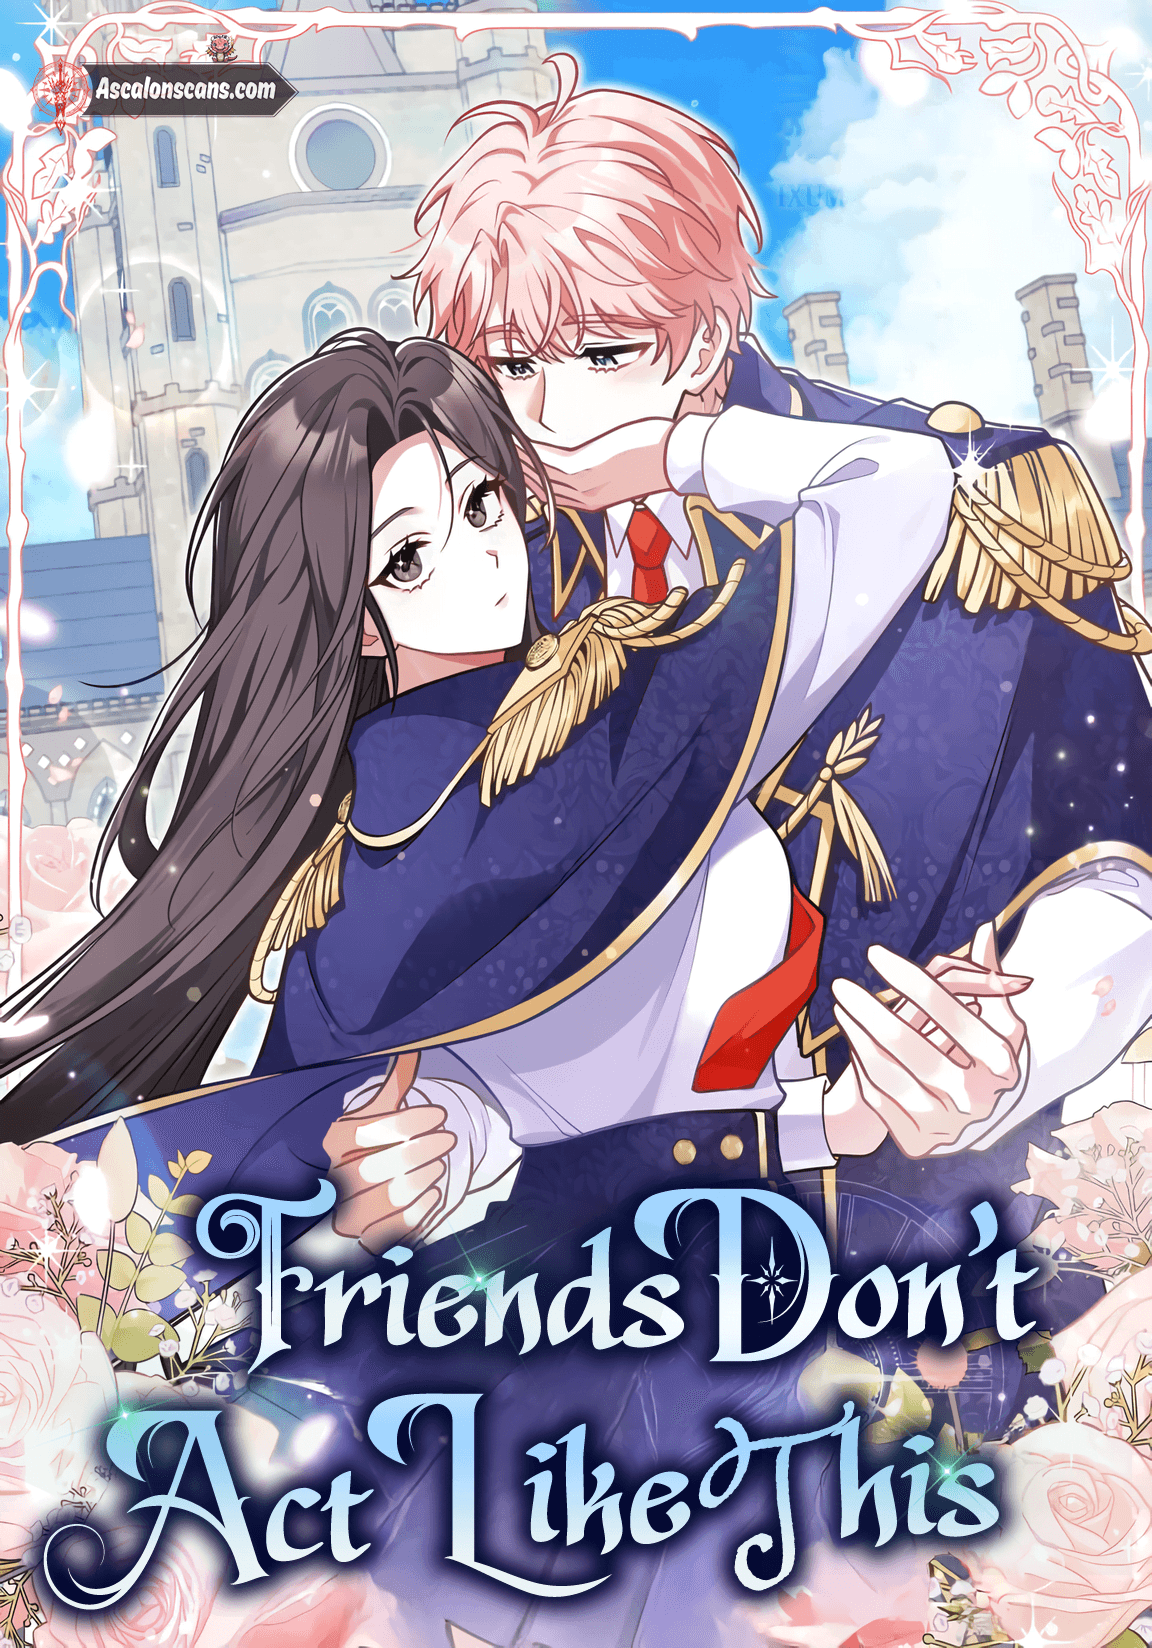 Friends Don't Act Like This cover image